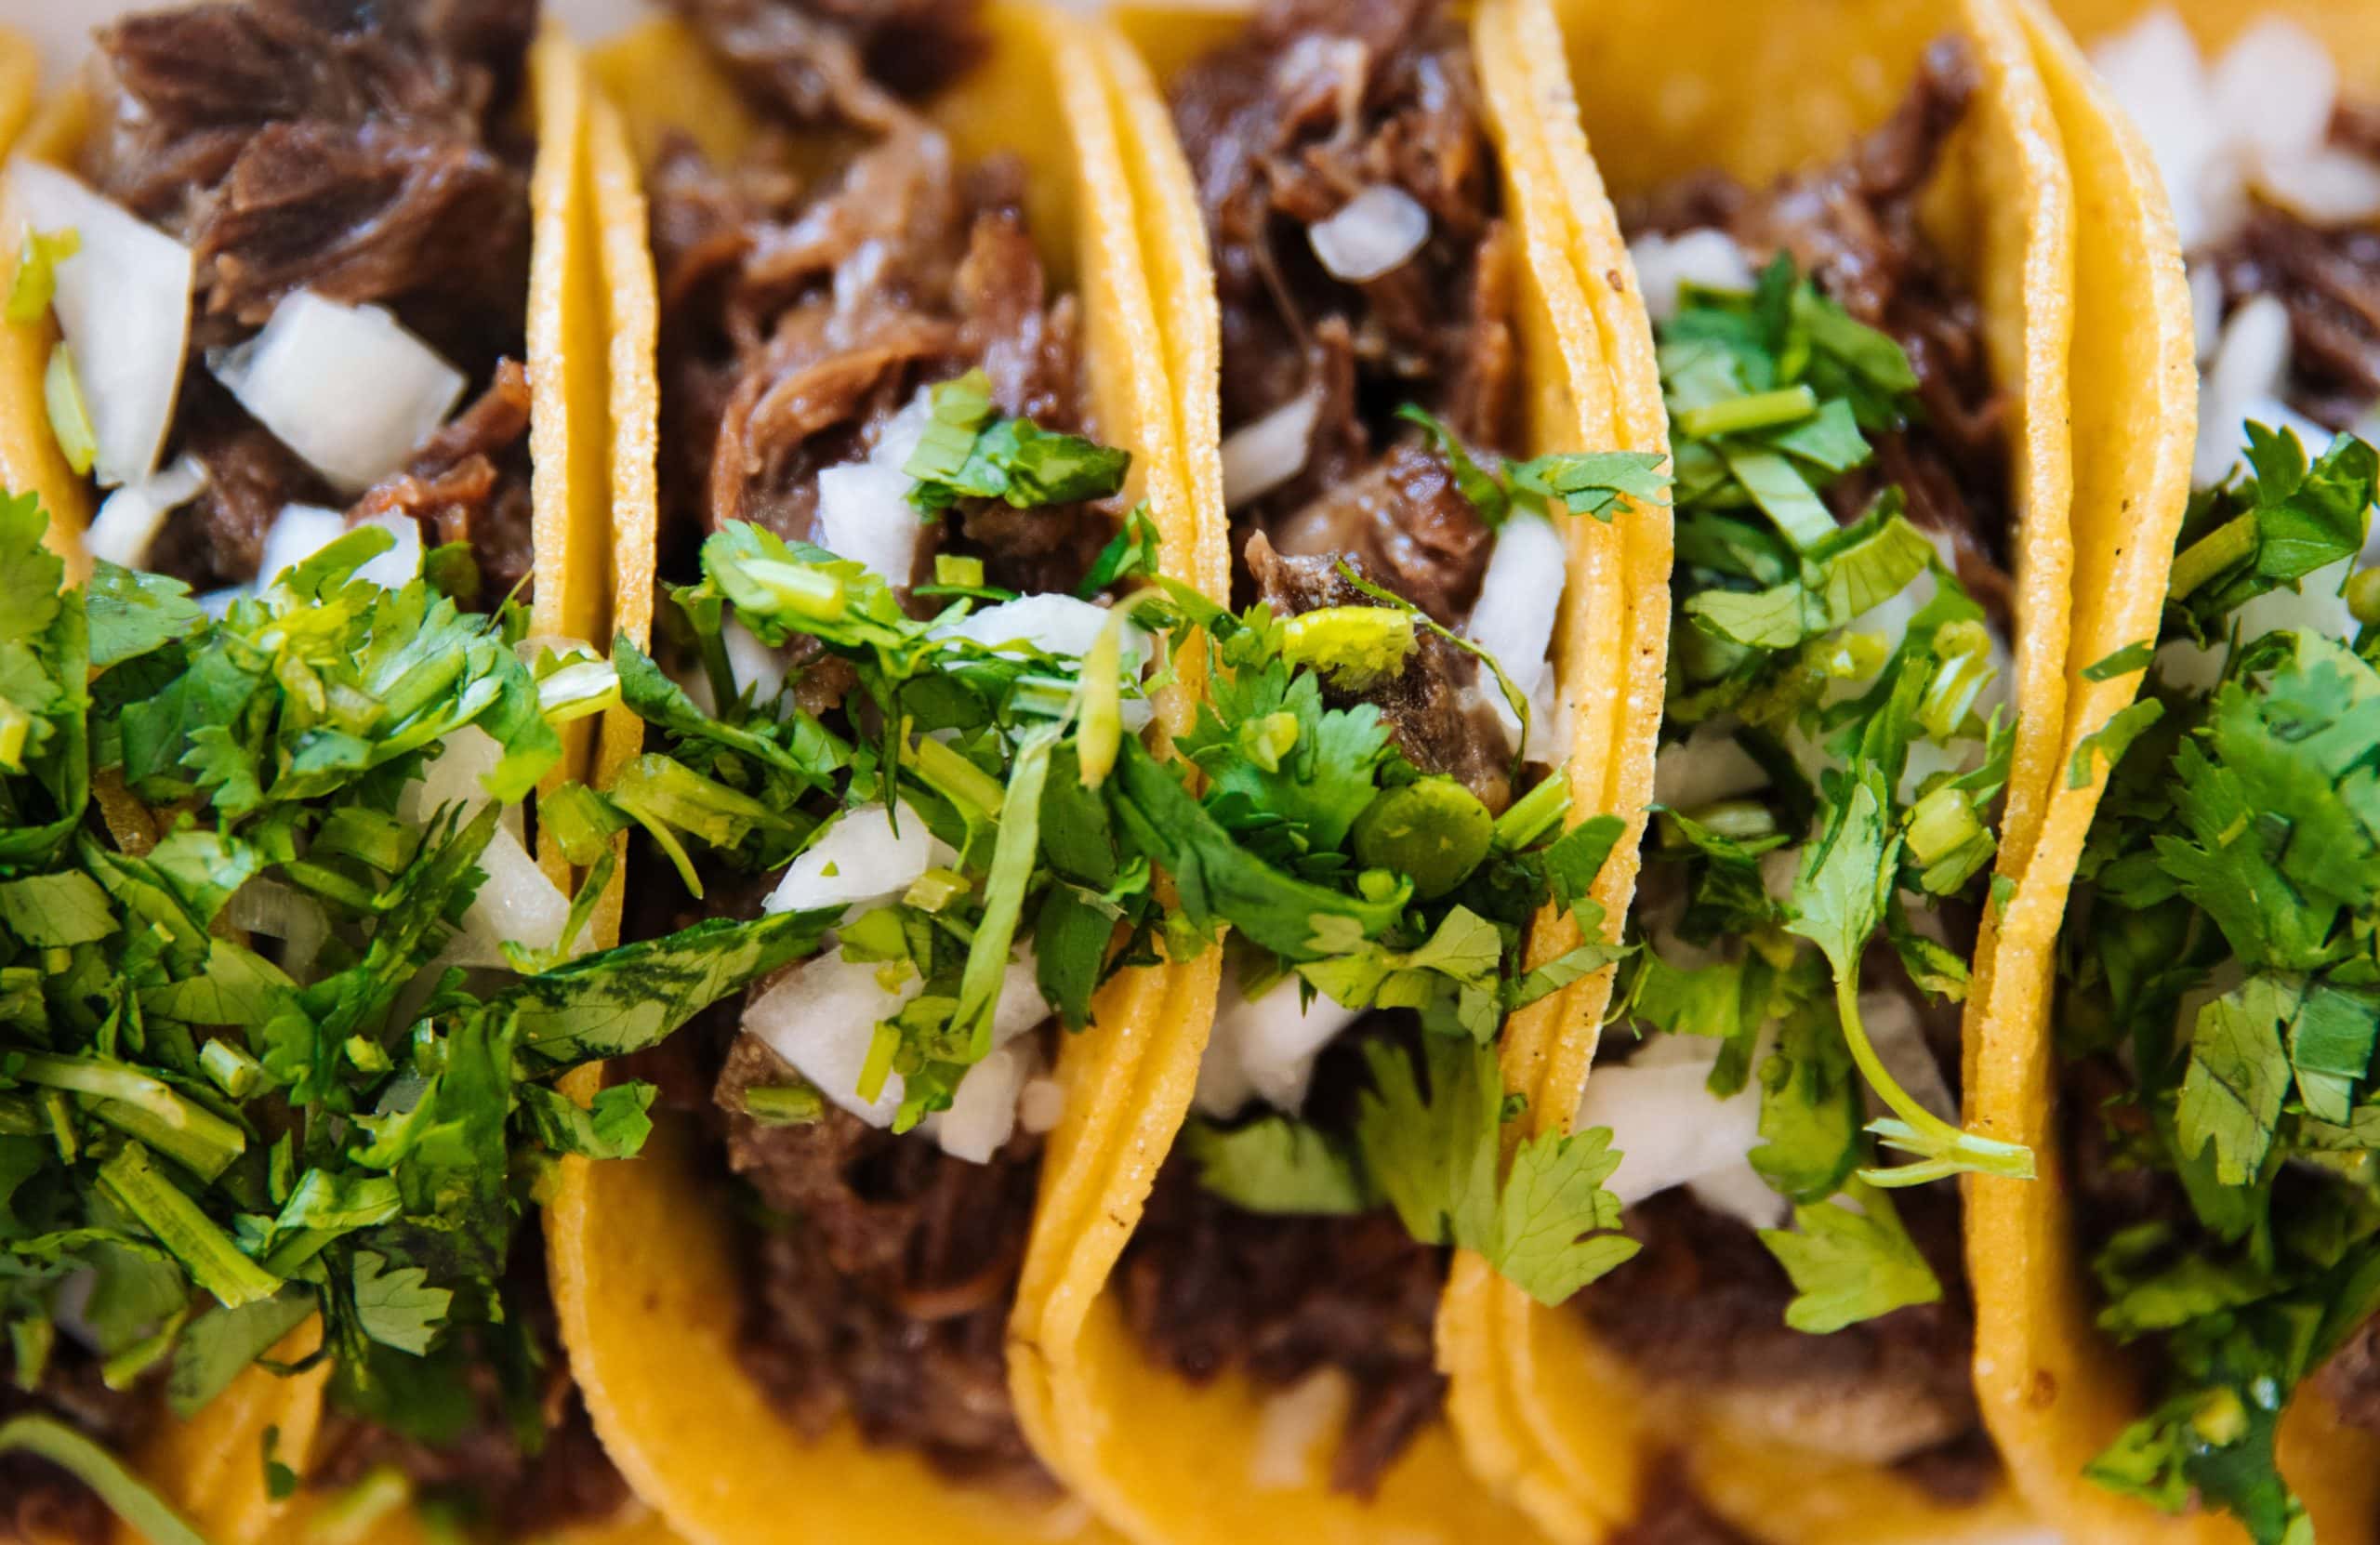 Oct. 4 is National Taco Day